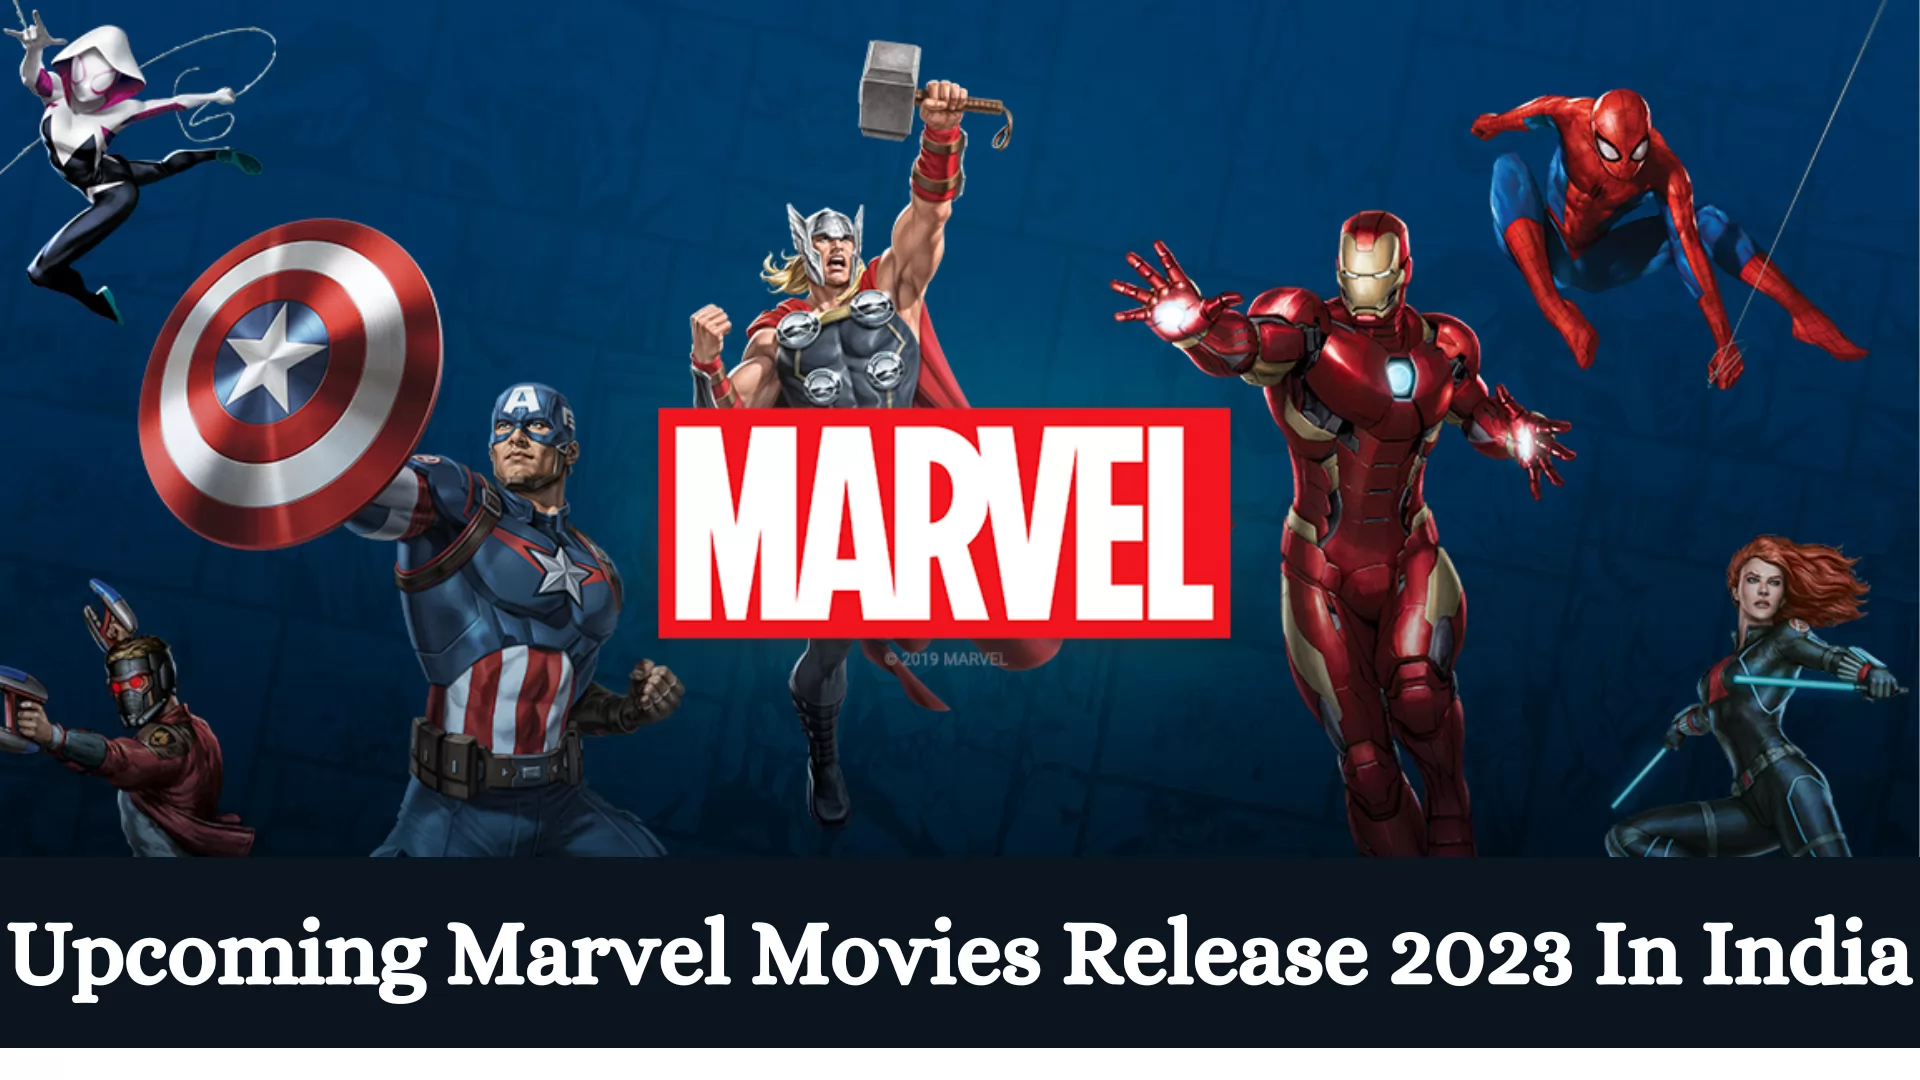 Upcoming Marvel Movies Release 2023 In India